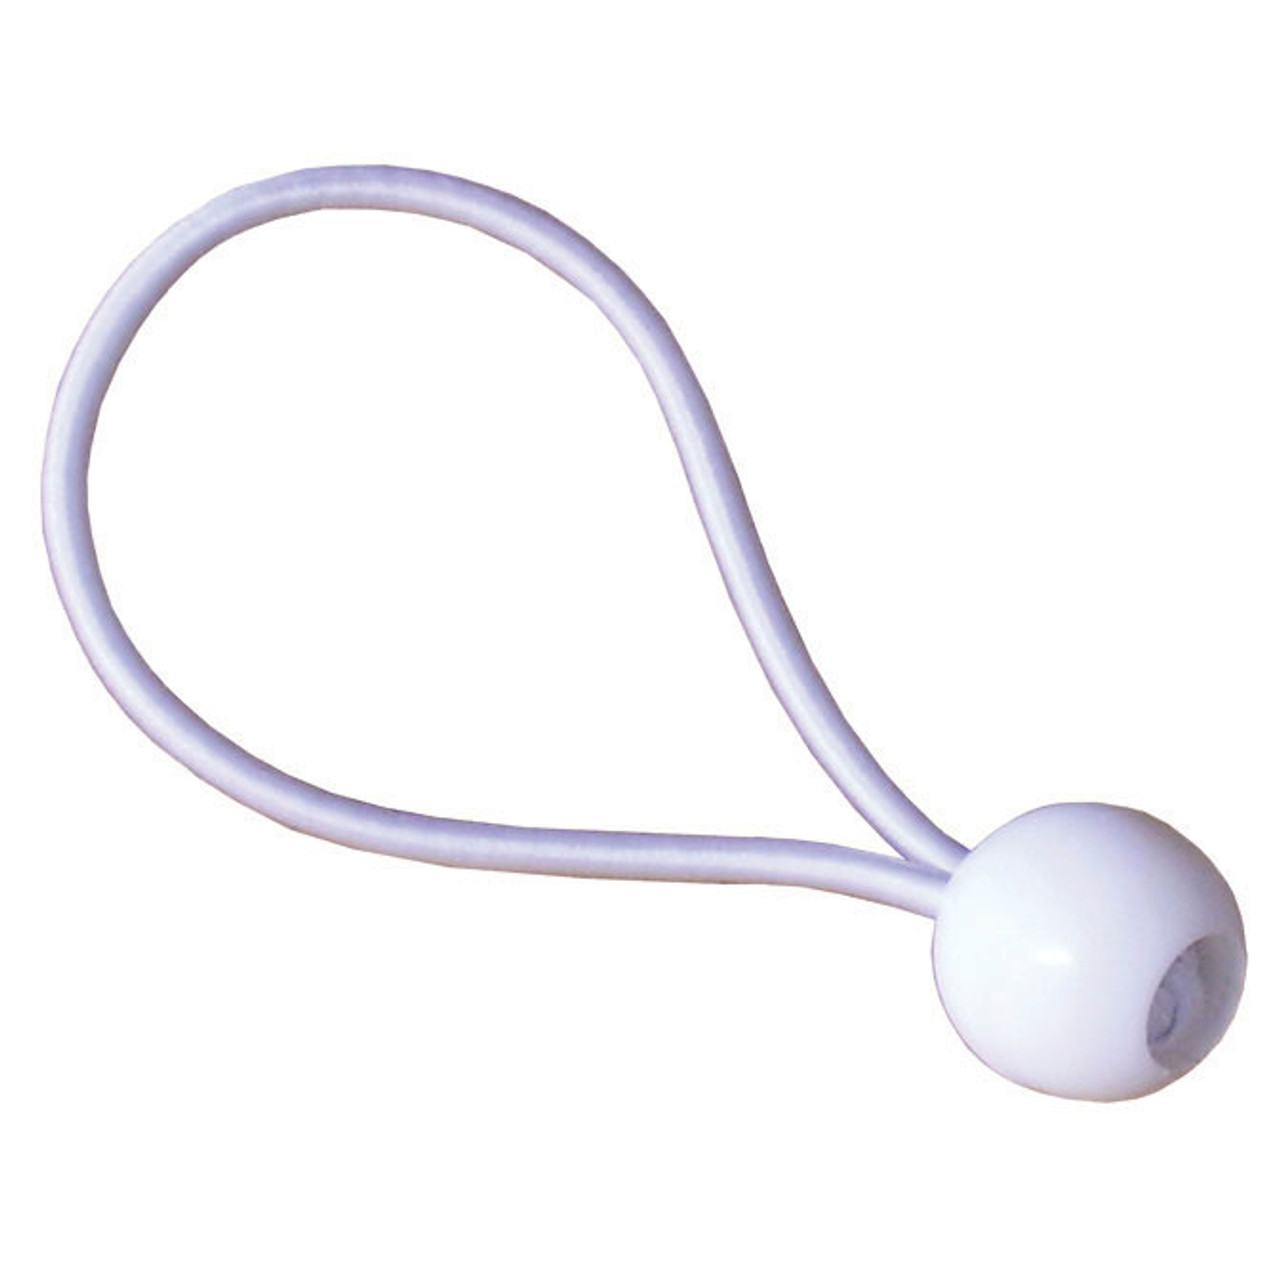 6" White Ball Bungee Tie Downs